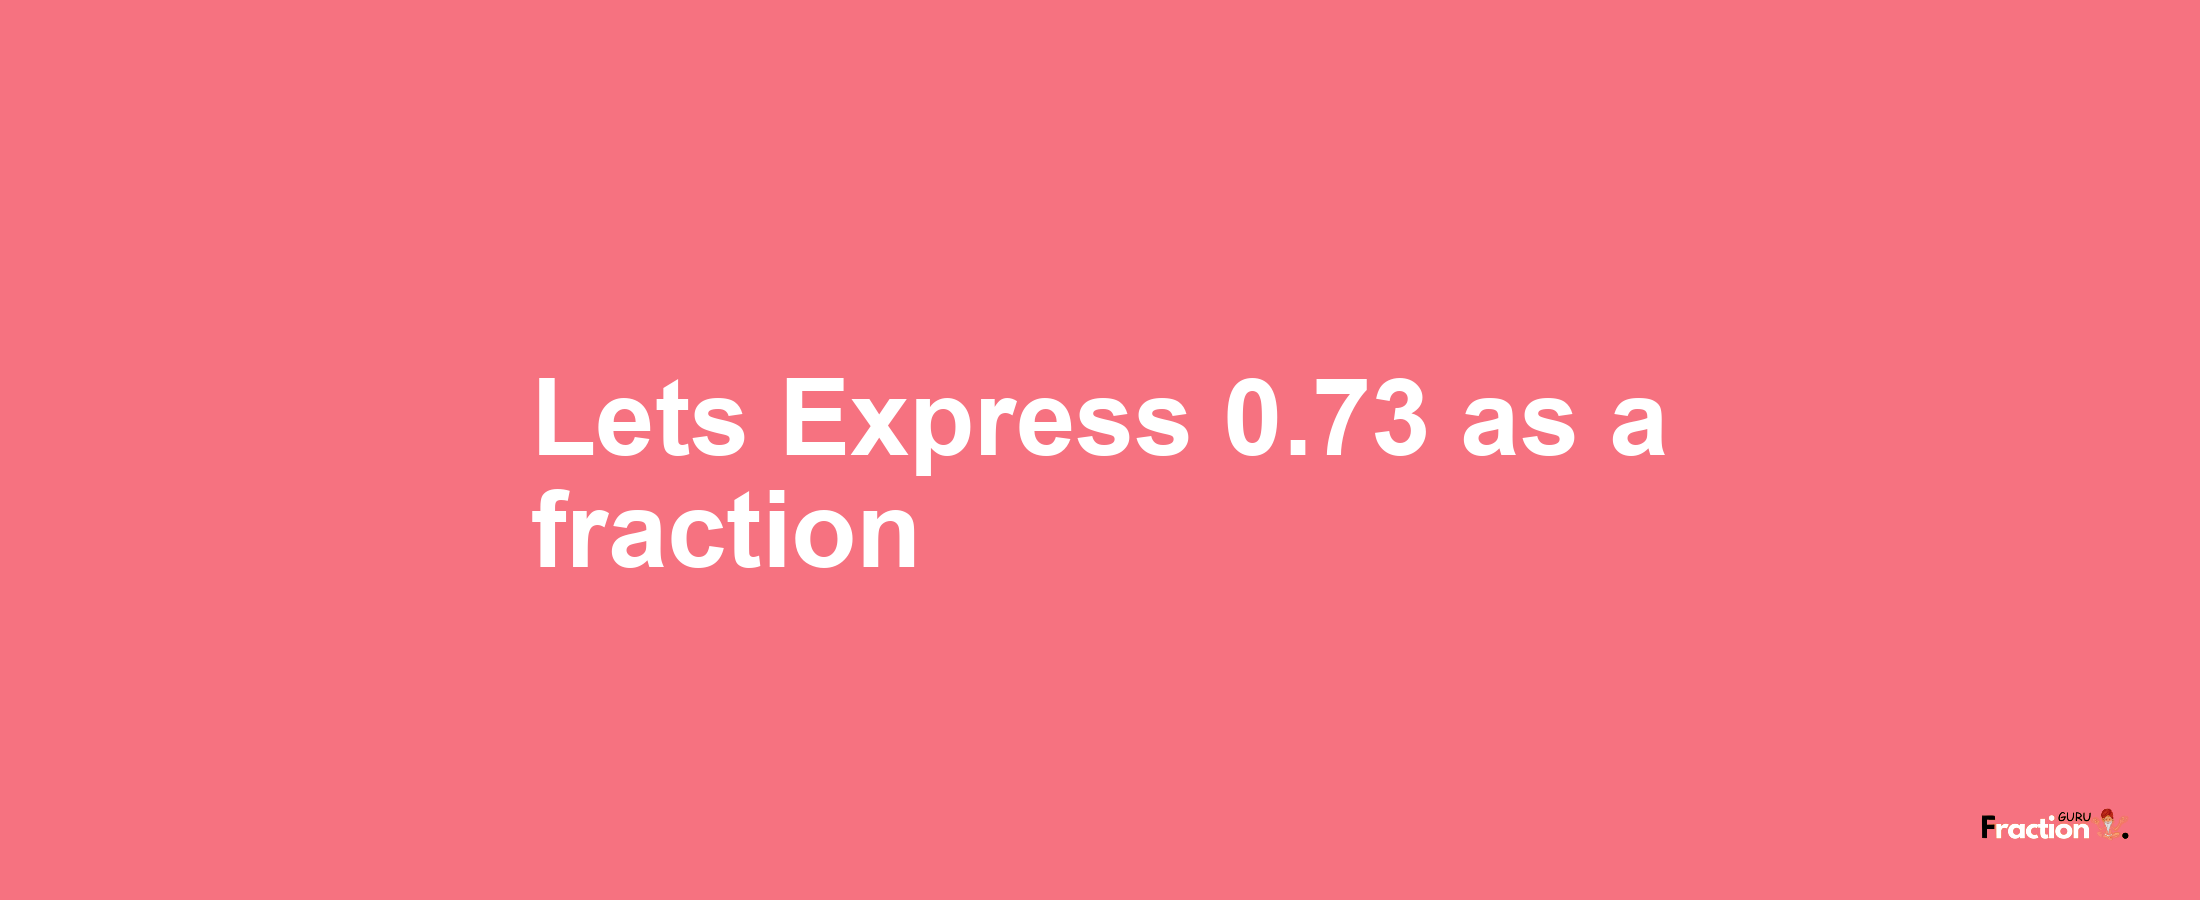 Lets Express 0.73 as afraction